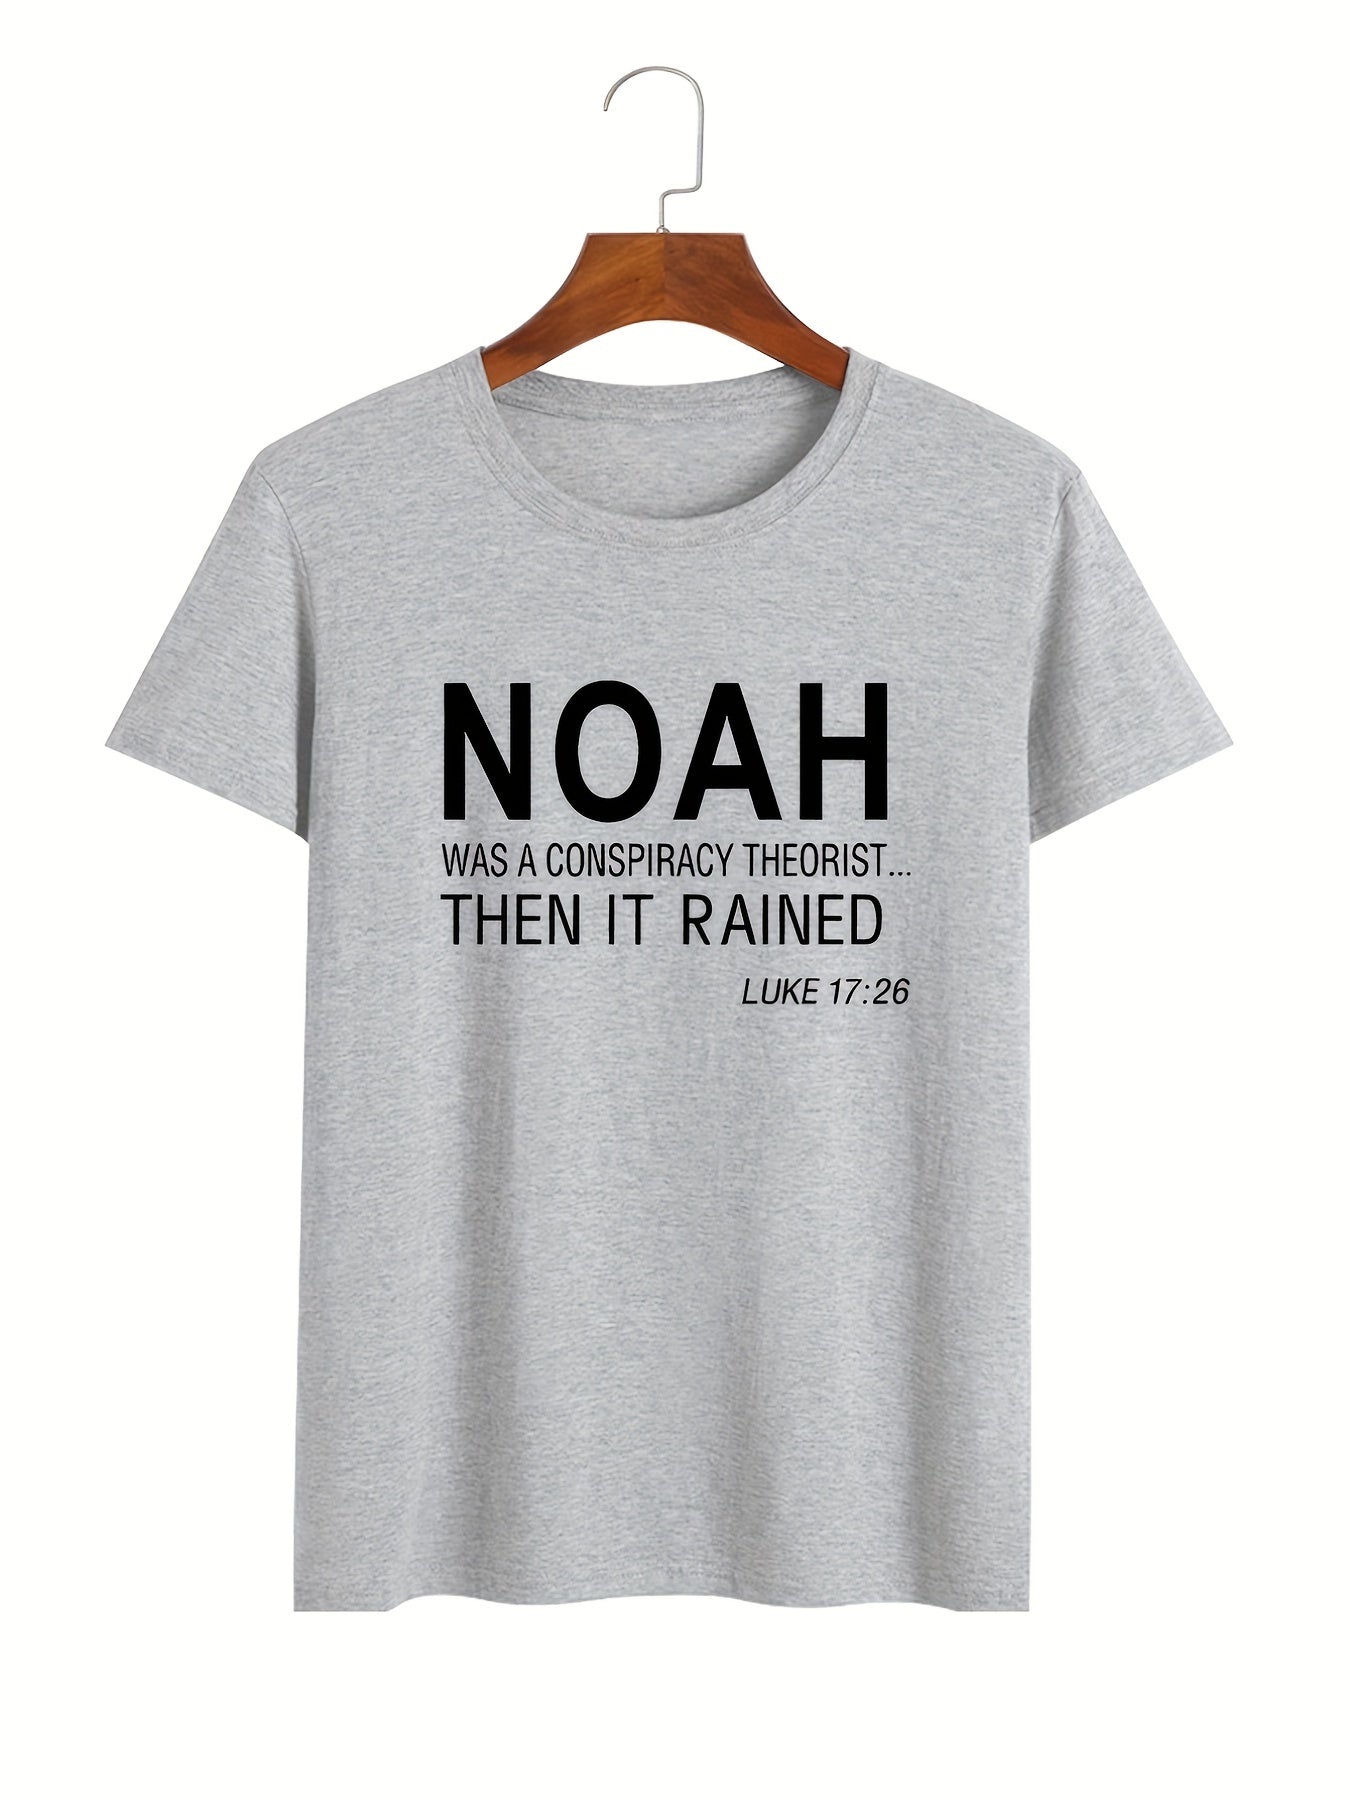 Plus Size Men's "Noah" Print T-shirts, Casual Oversized Graphic Tees For Summer Fitness Sports Leisurewear claimedbygoddesigns